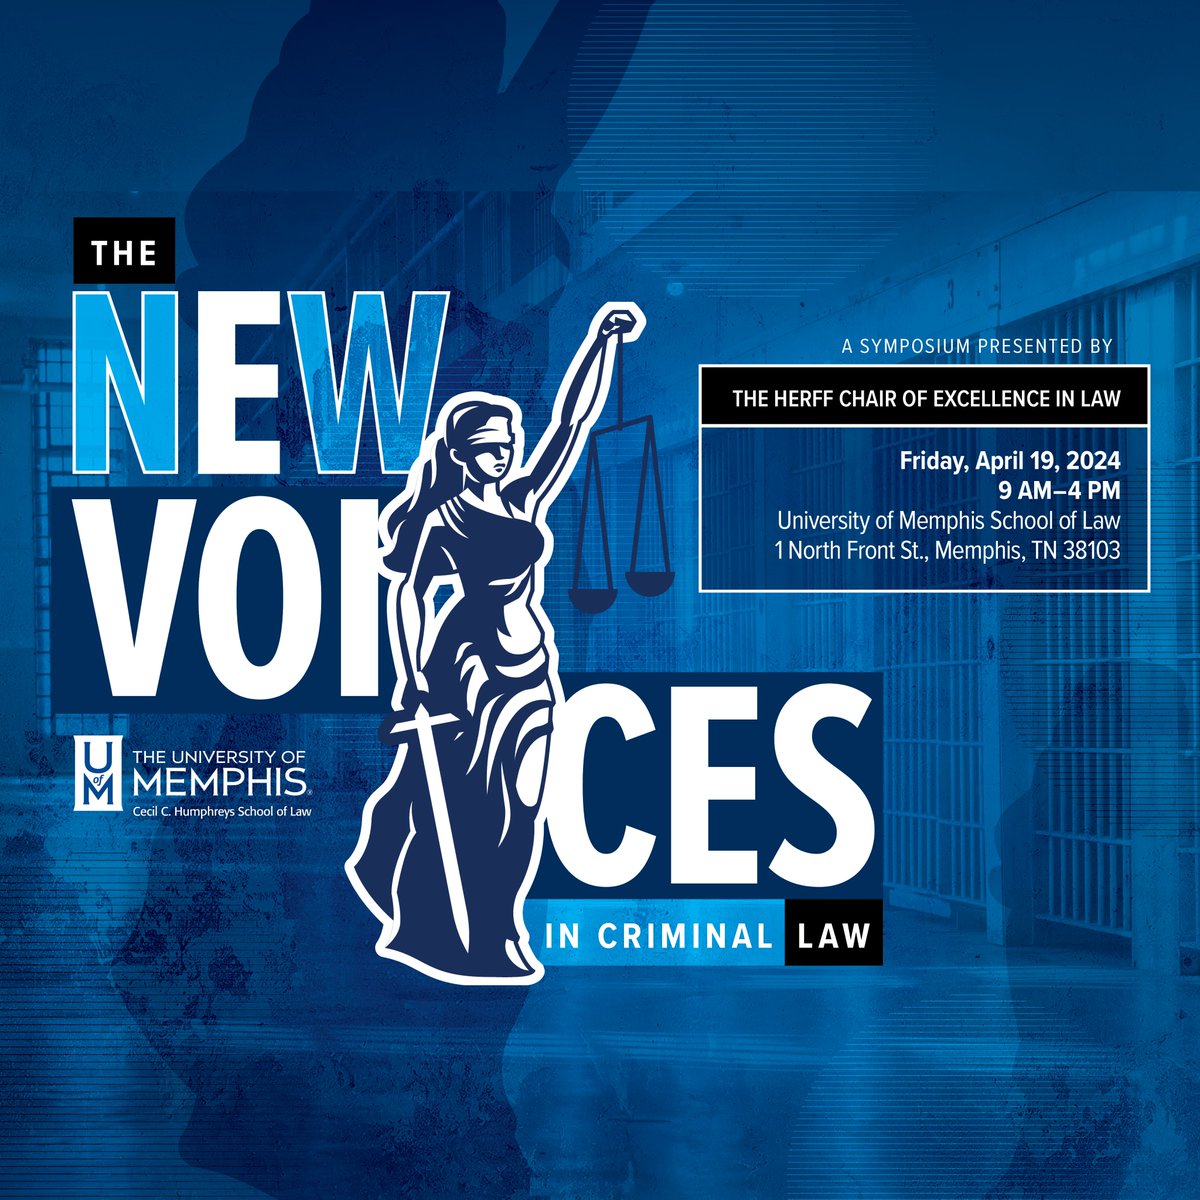 We're just a month away from an engaging & interesting Criminal Law symposium in 'The New Voices in Criminal Law,' presented by our Herff Chair of Excellence, Prof Stephen Galoob. Great lineup of rising stars & leading scholars. Registration opens soon. memphis.edu/law/events/her…